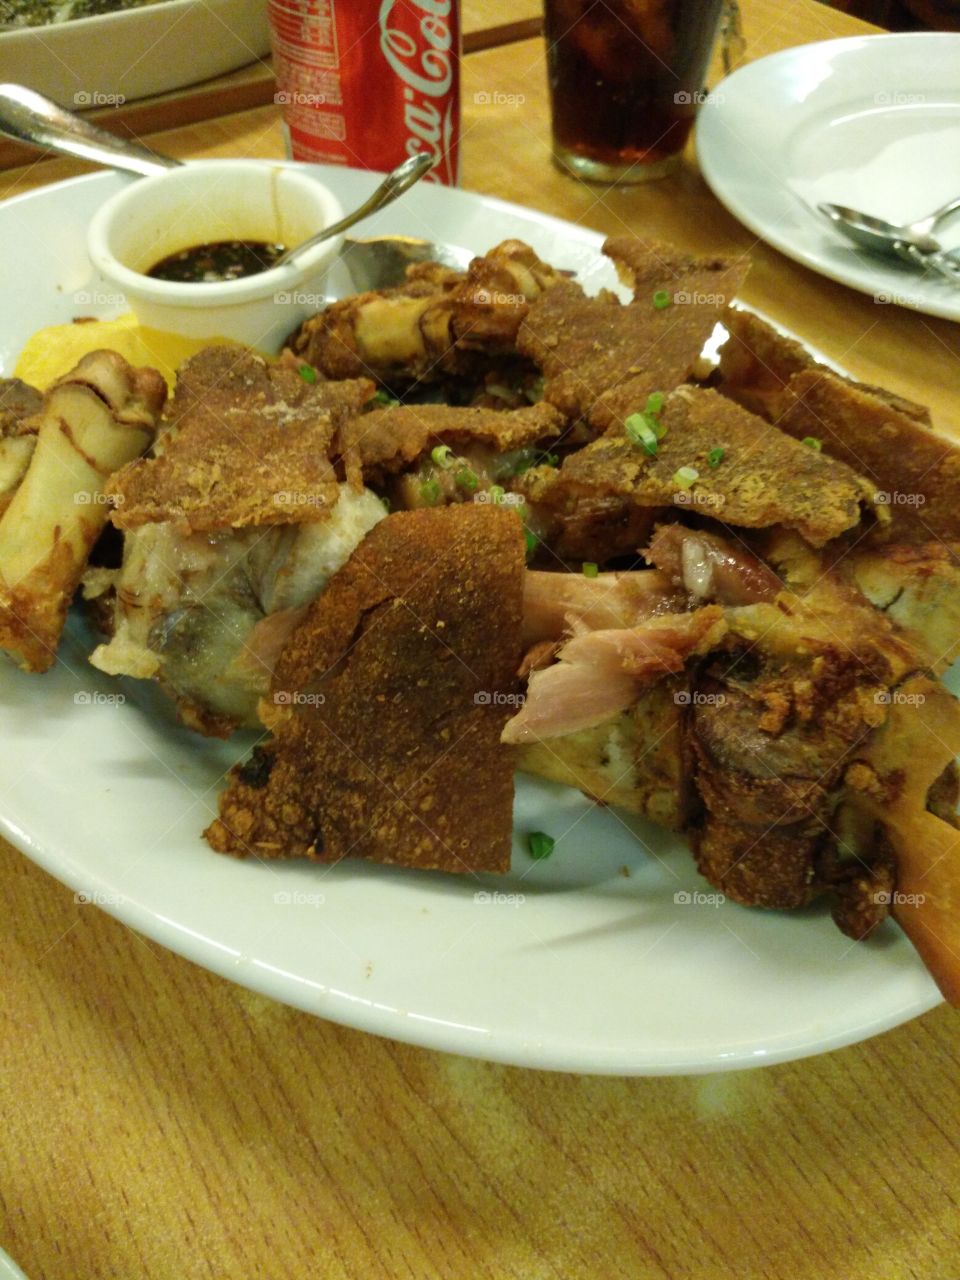 Crispy Pata is a specialty dish in the Philippines. Don't forget to try this!!